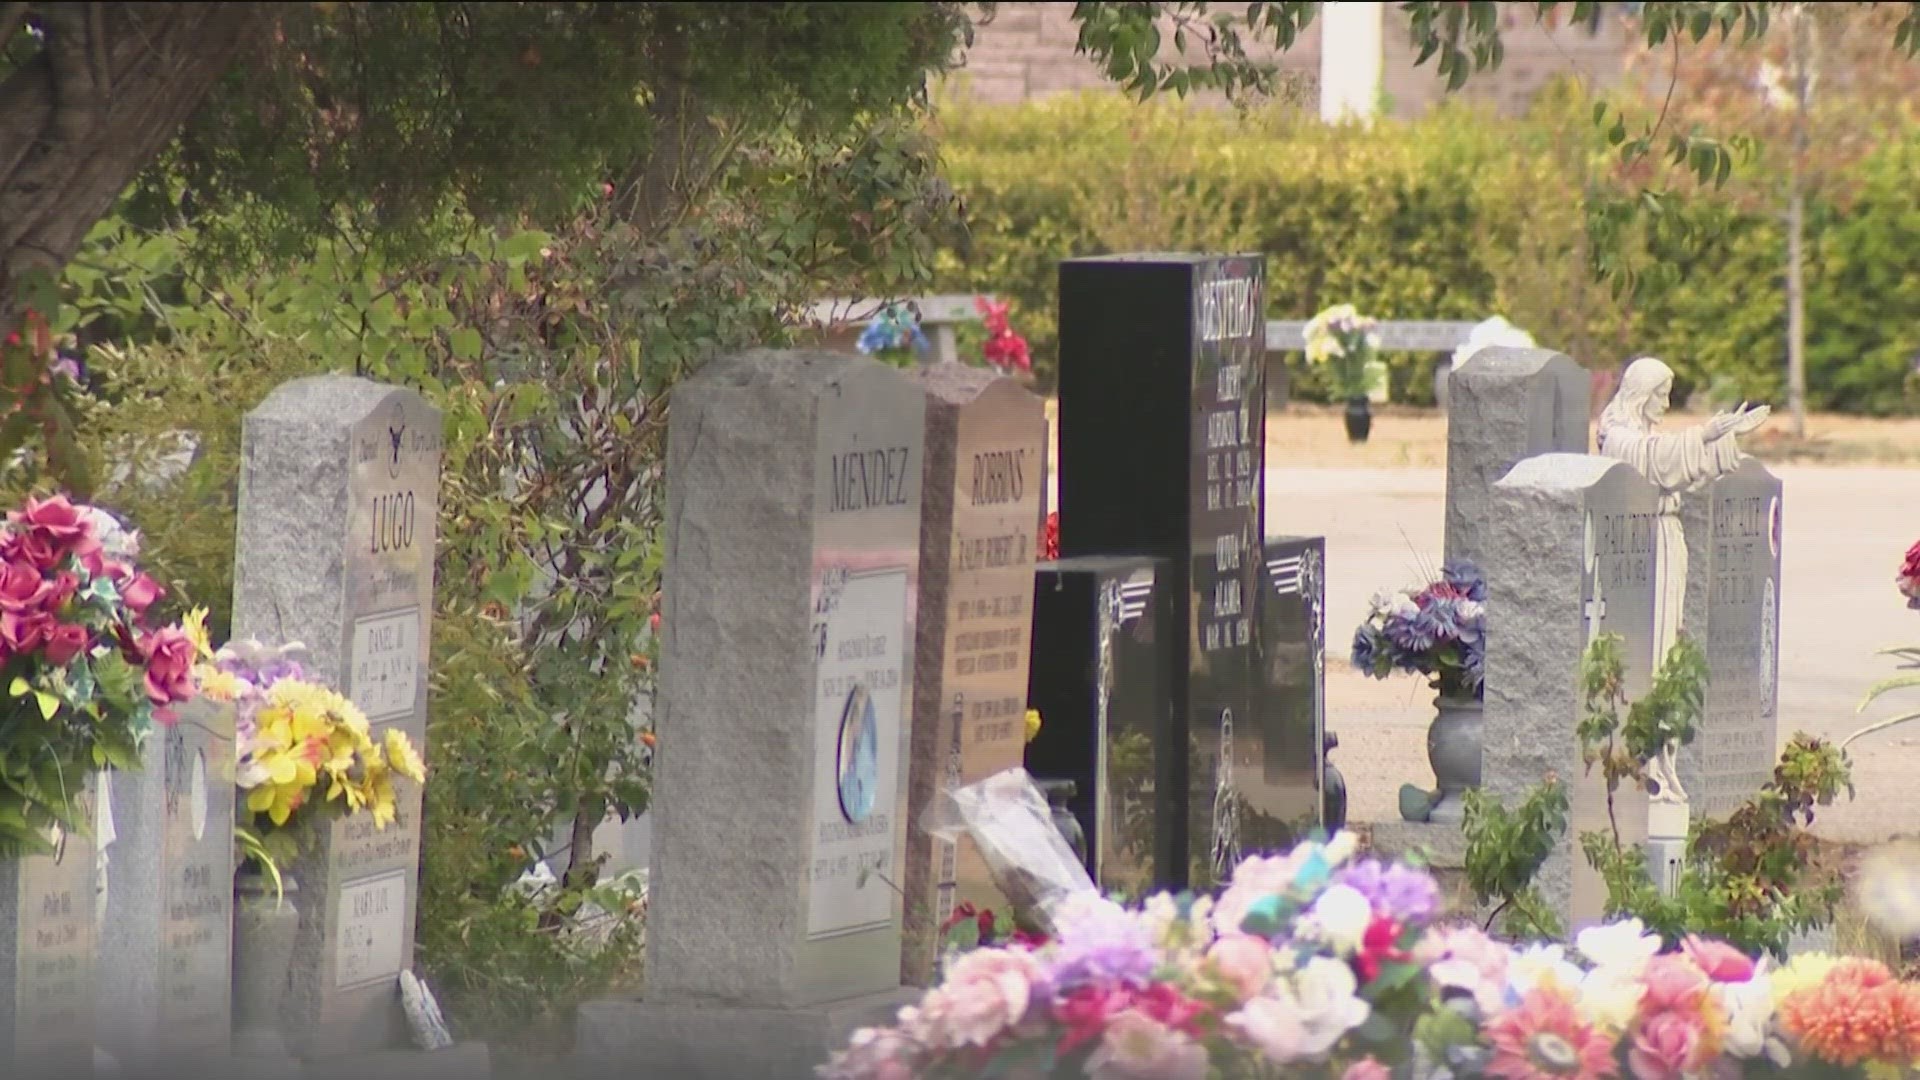 Assumption Cemetery in South Austin has come under criticism for not providing burial headstones in a timely fashion.